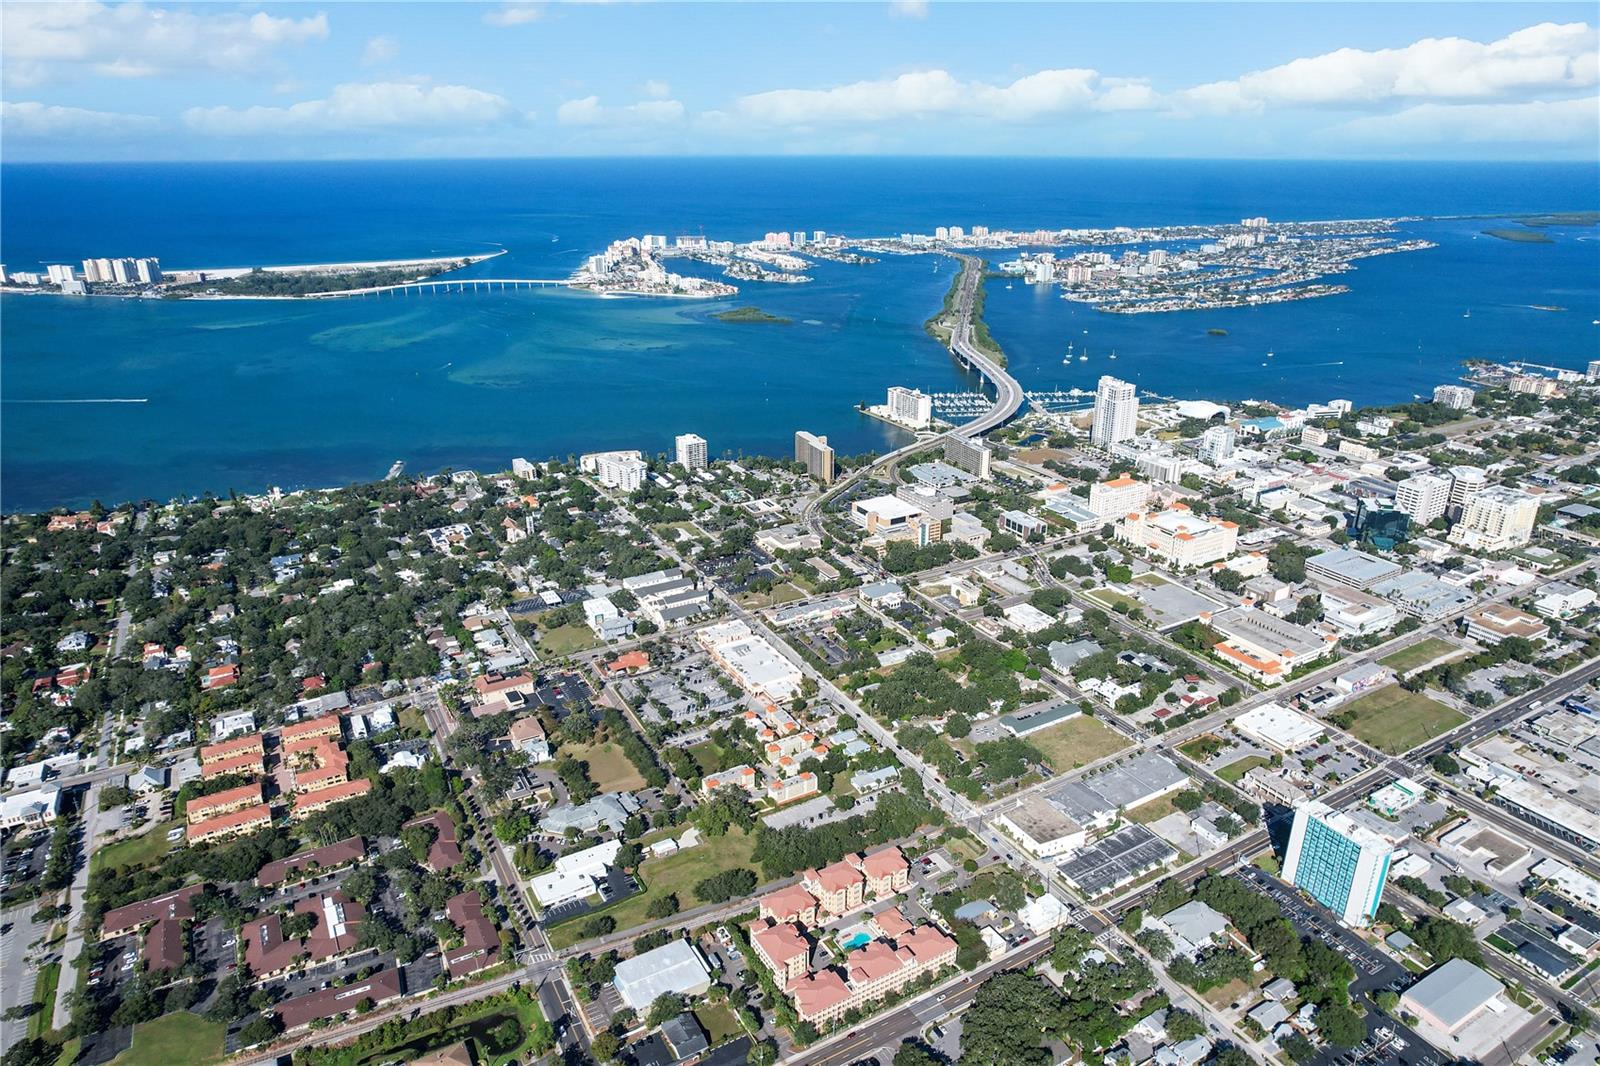 Aerial view of Memorial Causeway leading to Clearwater Beach.